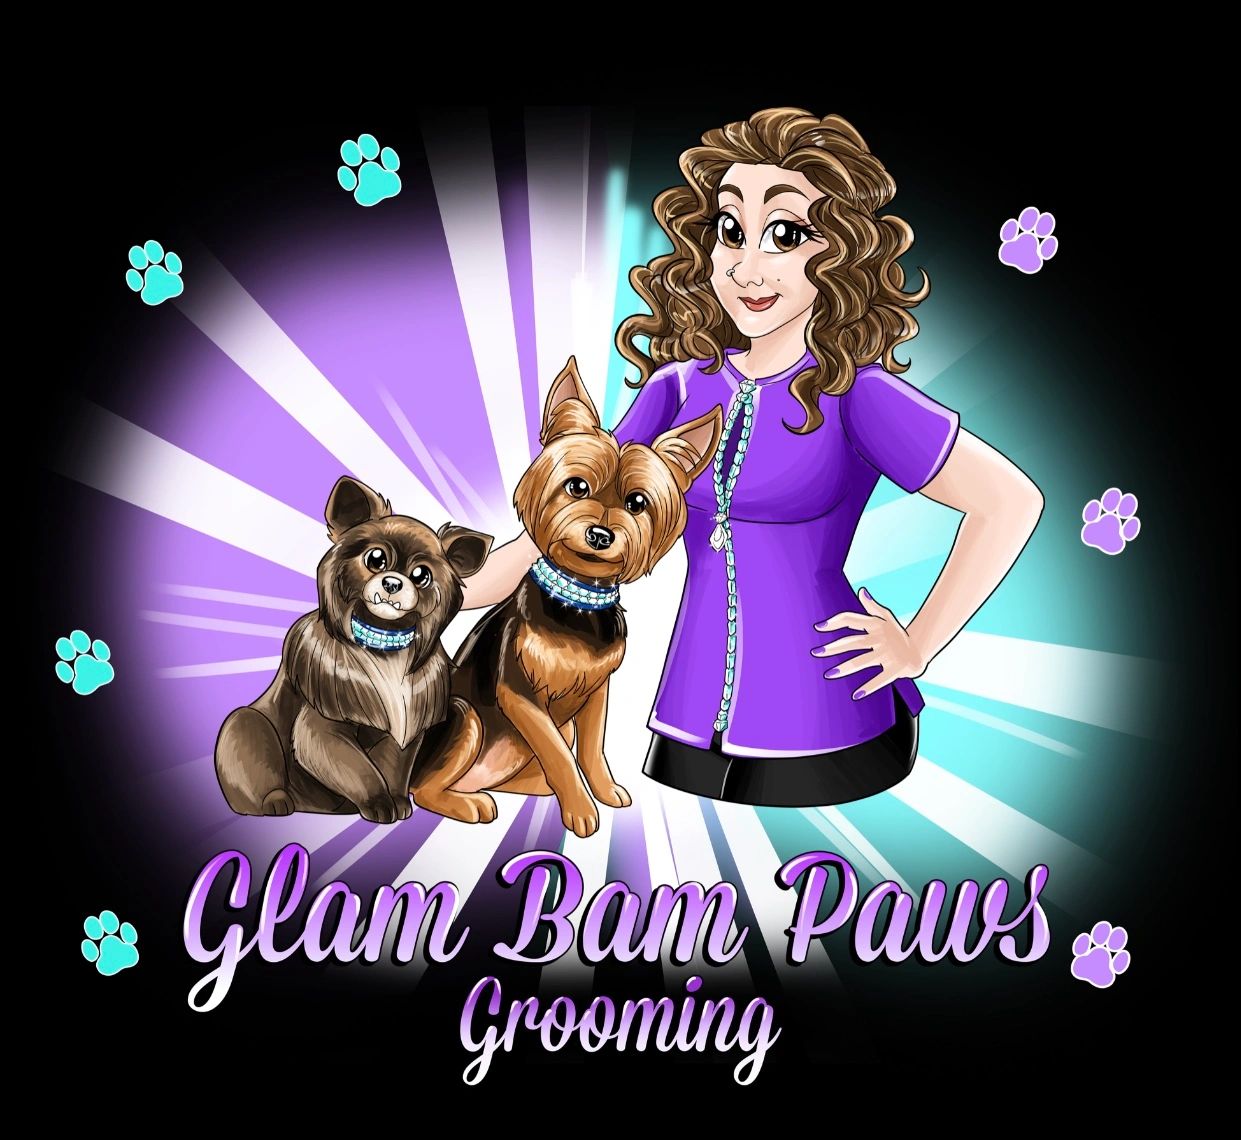 Dog Grooming Business - Glam Bam Paws